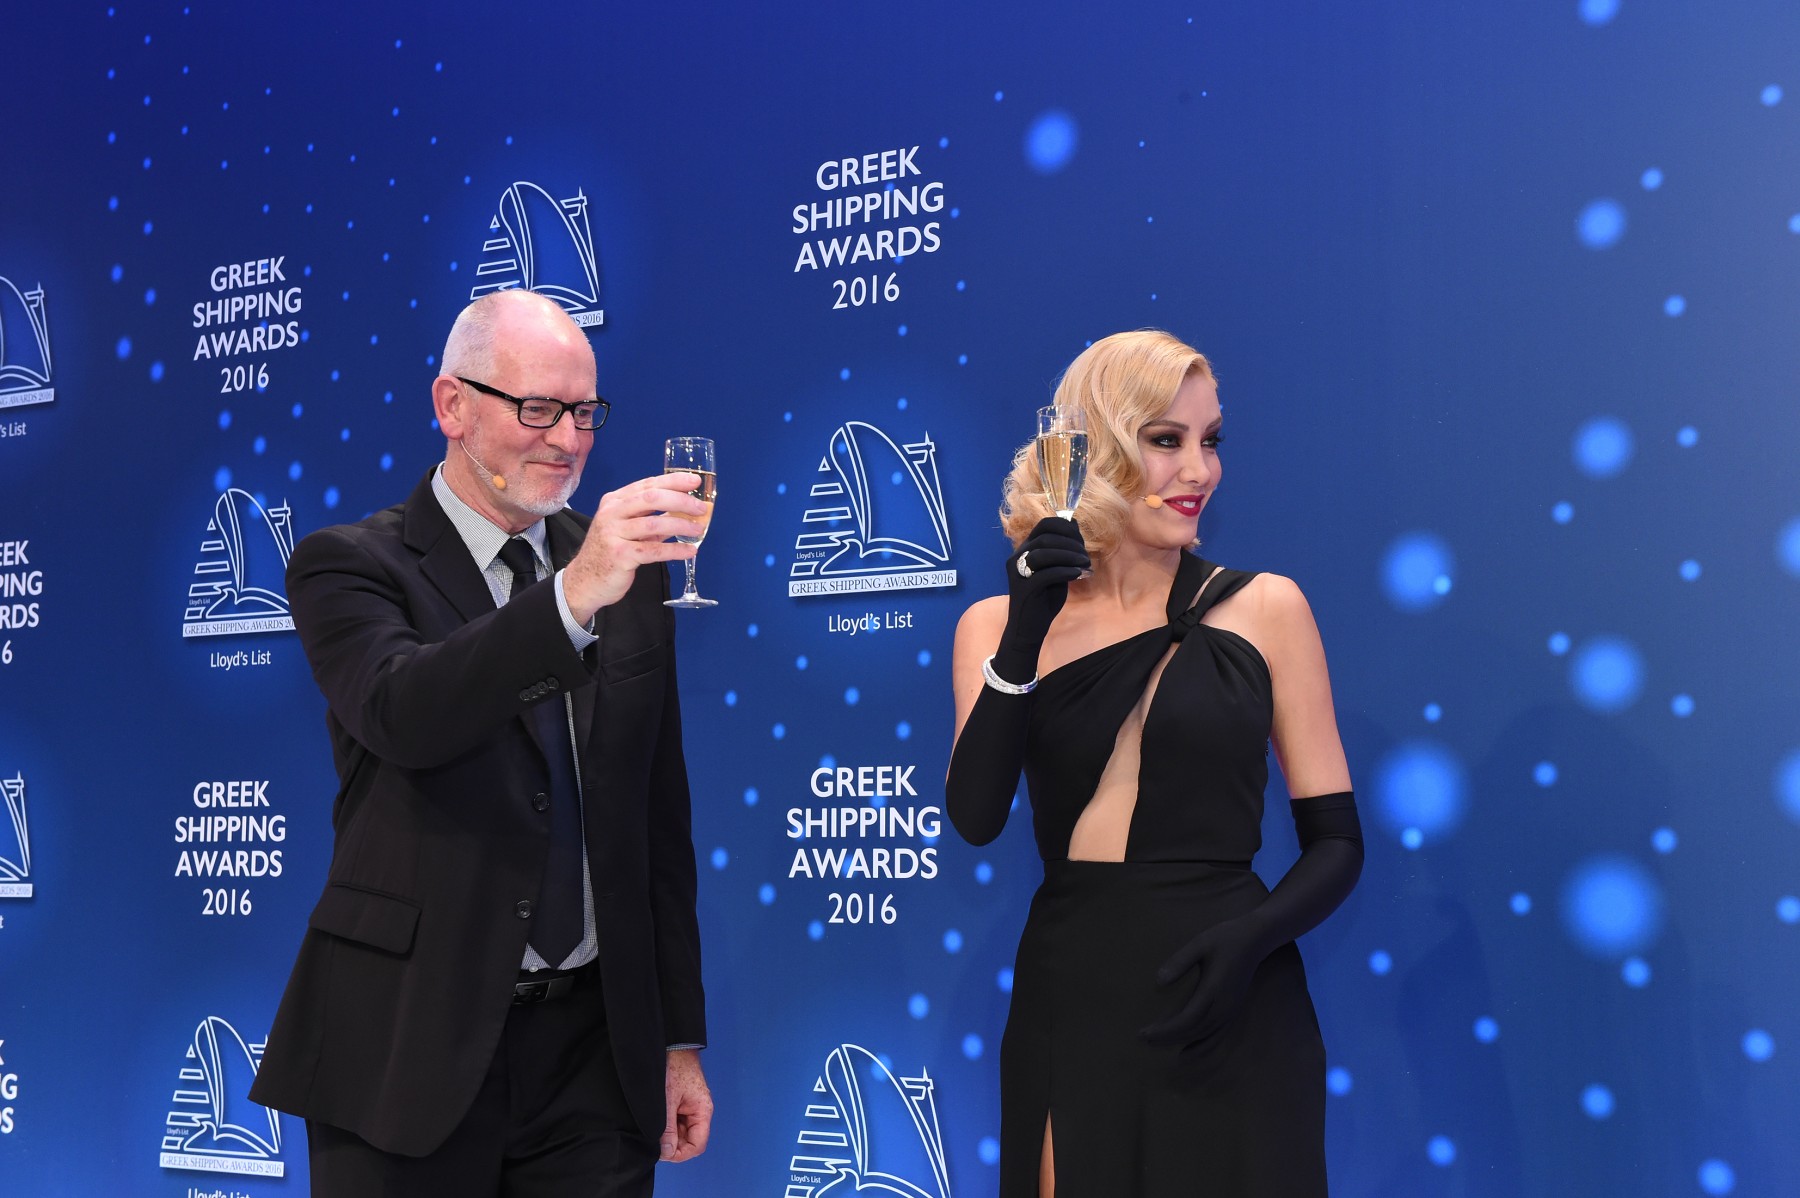 Co-hosts for the 2016 Greek Shipping Awards were Nigel Lowry and Andriana Paraskevopoulou.